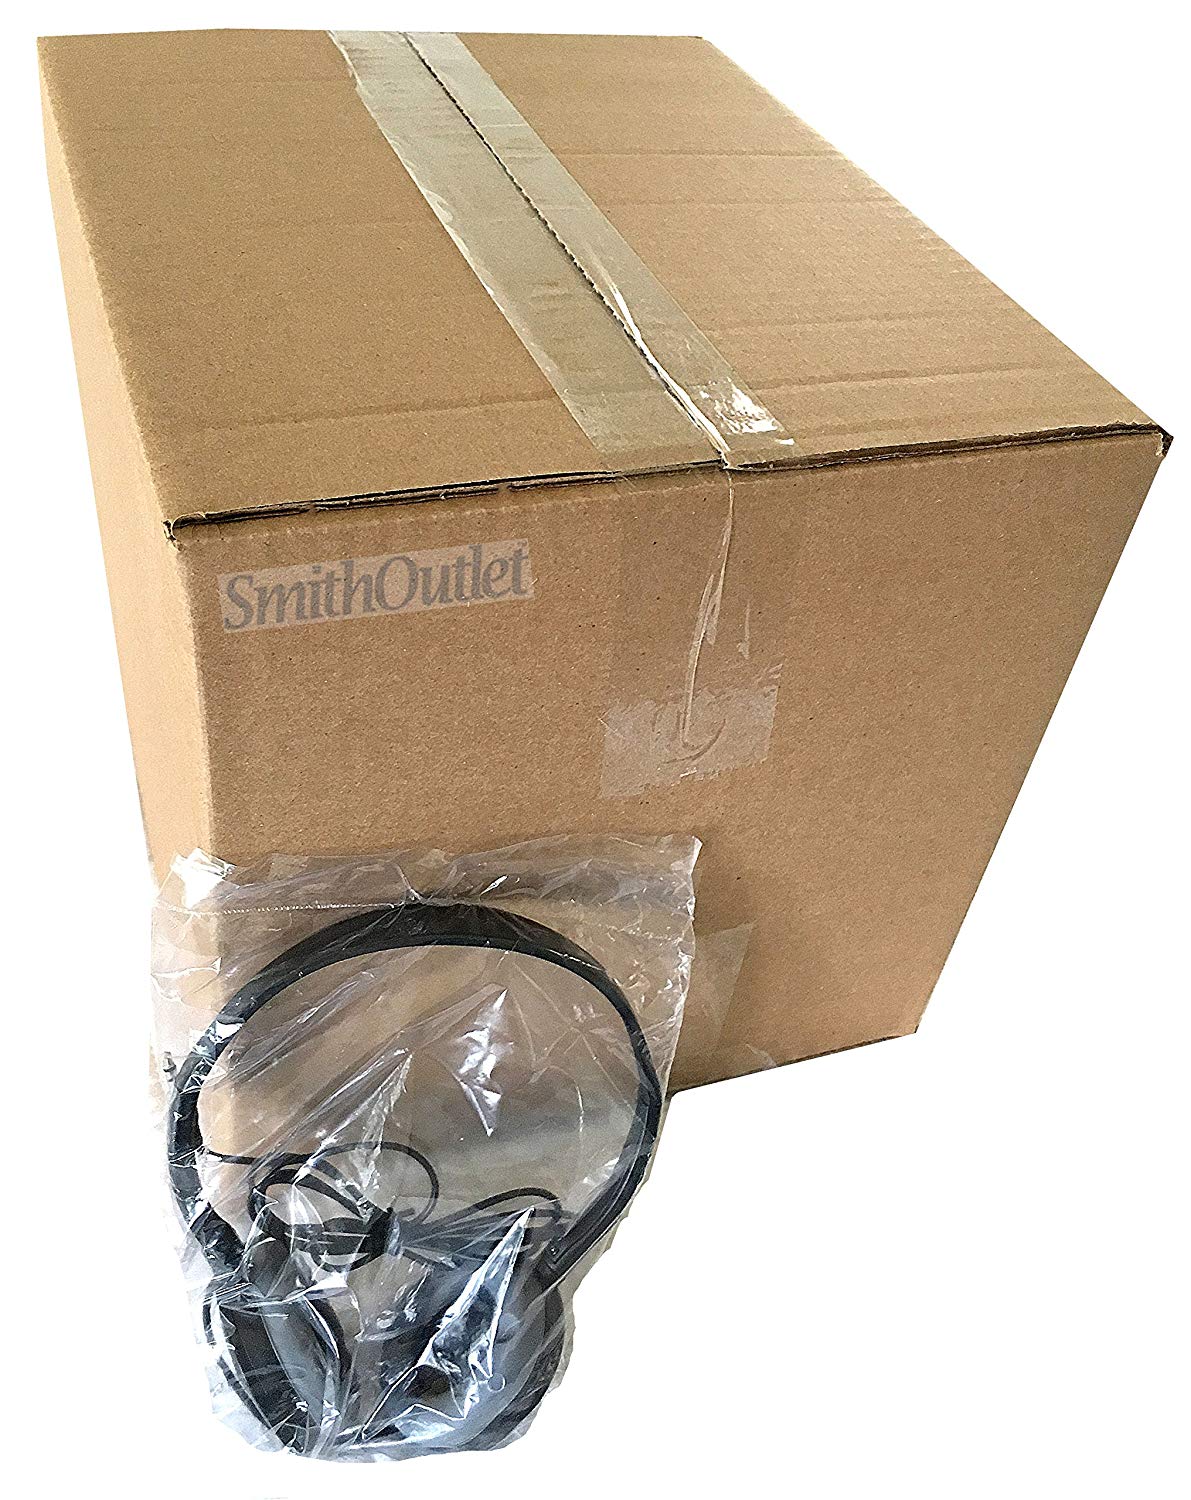 SmithOutlet 200-Pack Stereo Headphones Packaged for Efficient Distribution